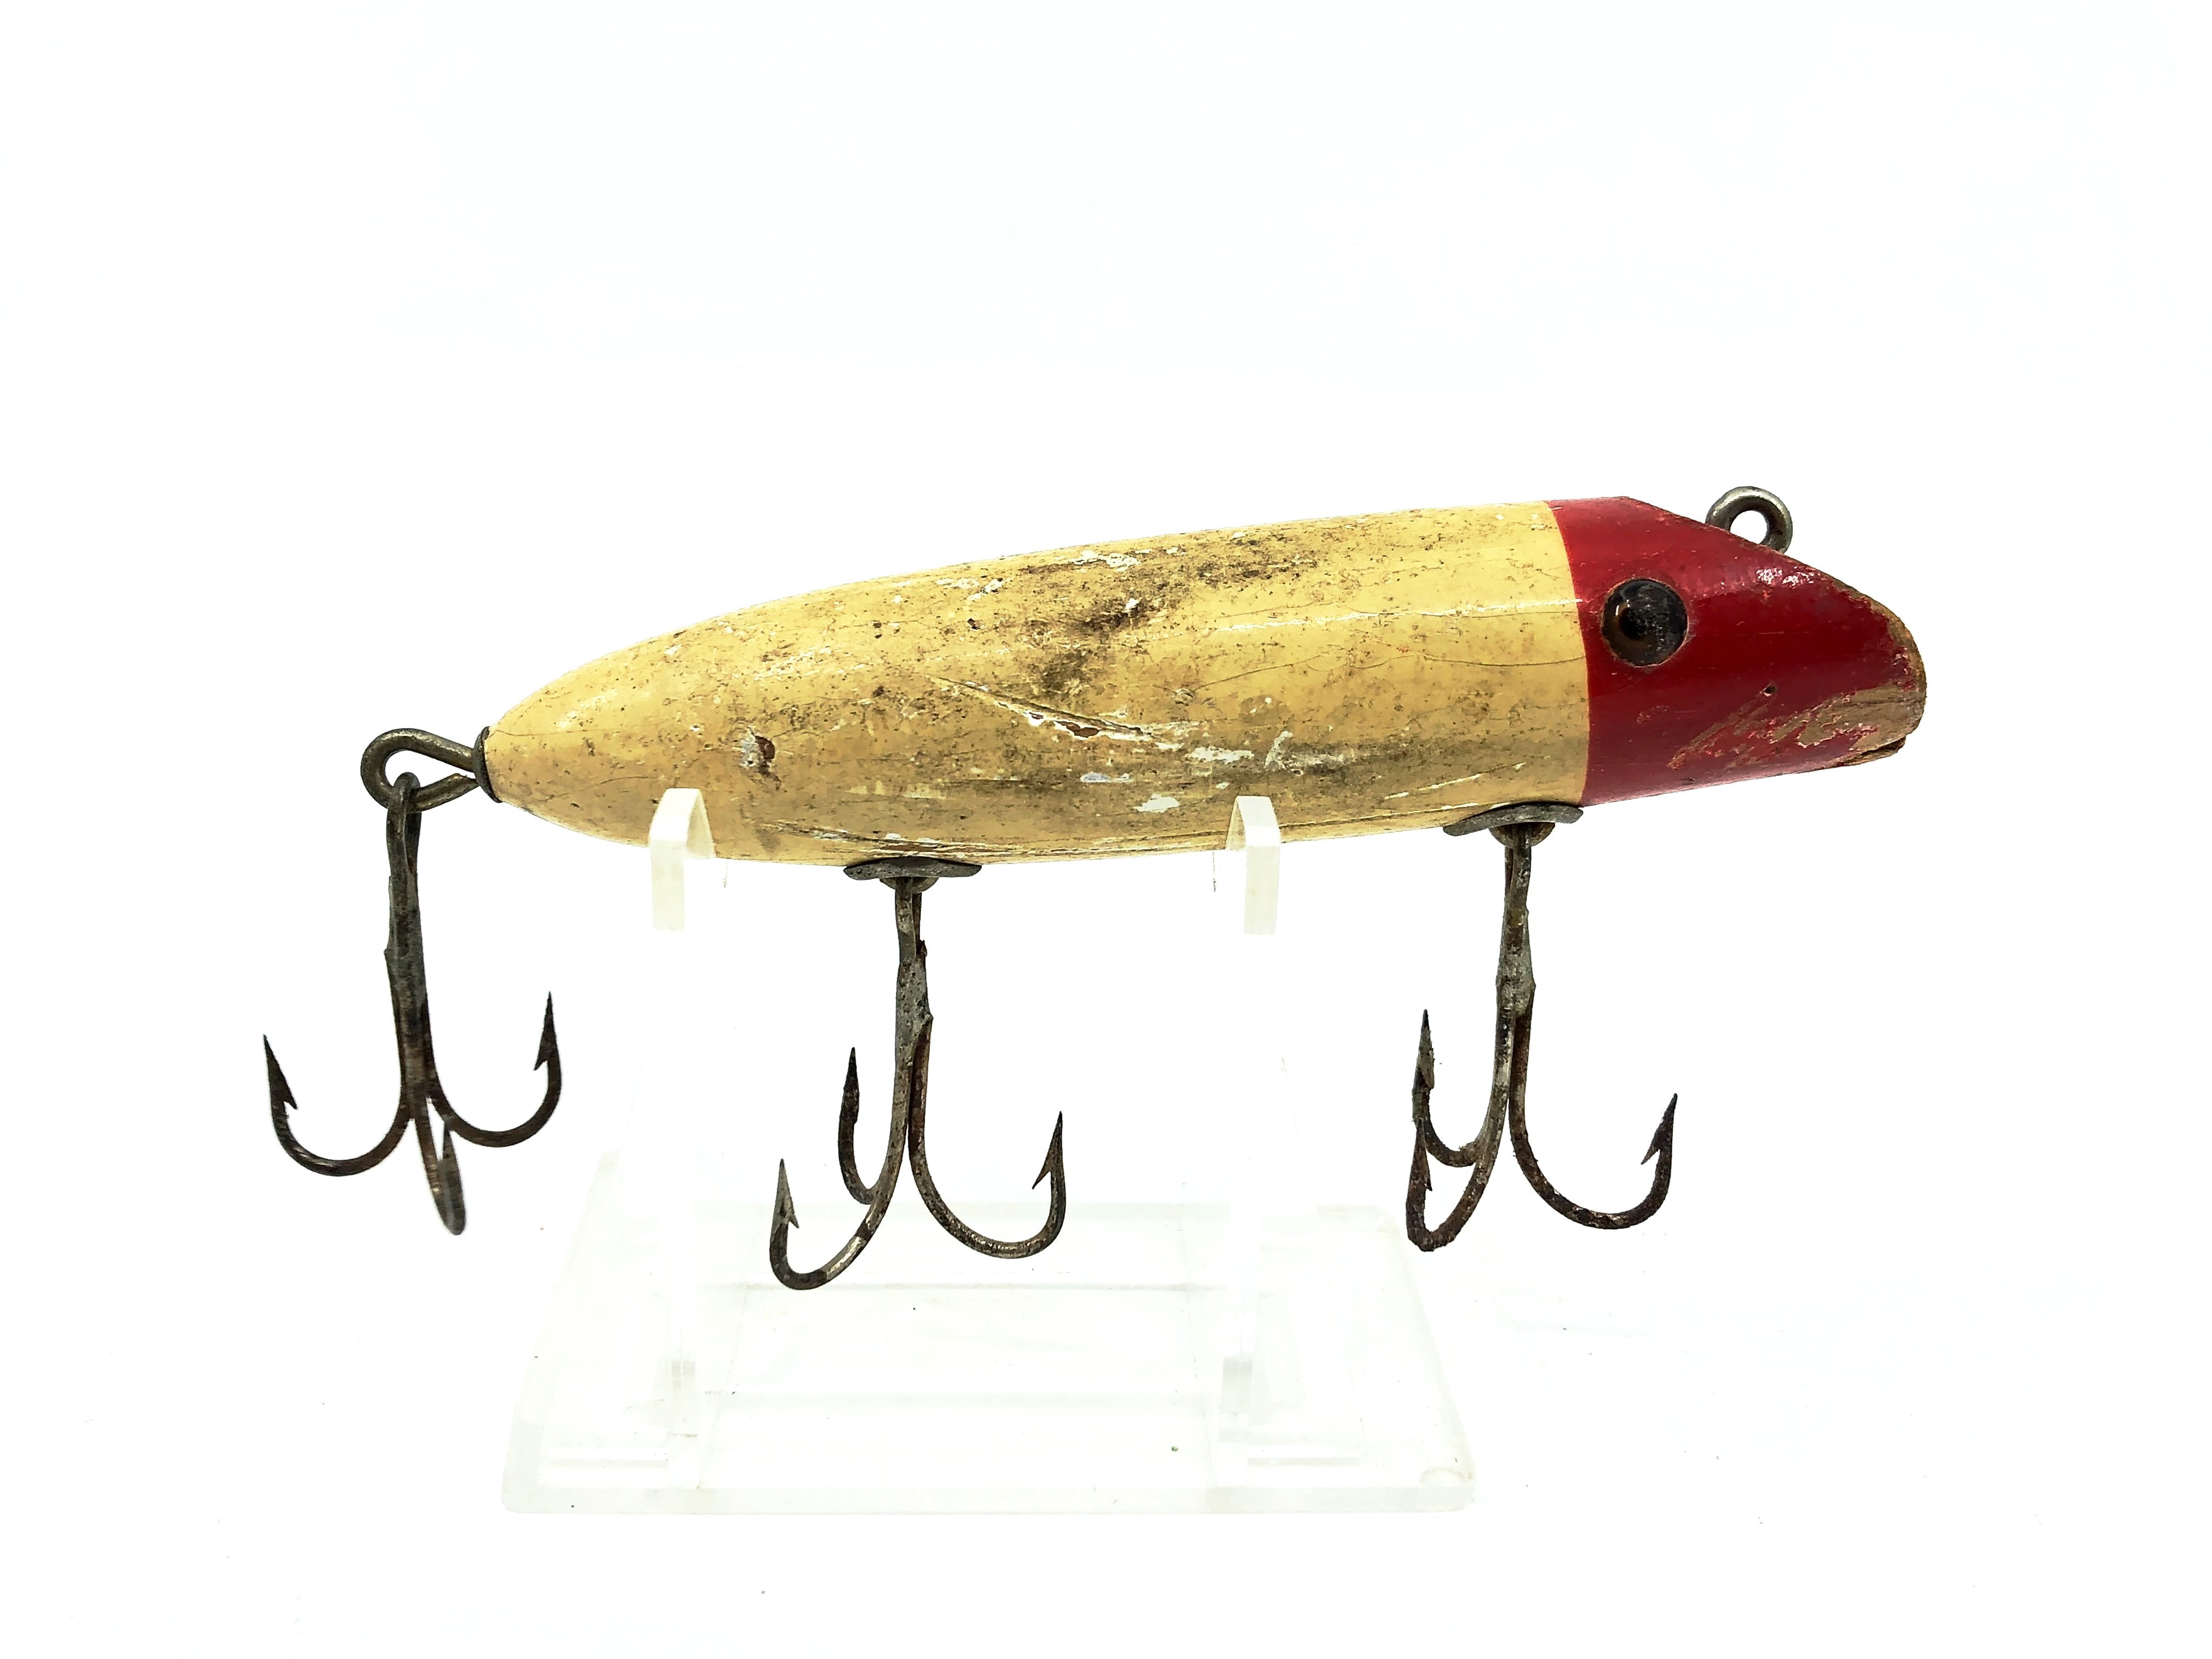 Early South Bend Bass Oreno, Red Head/White Body Color – My Bait